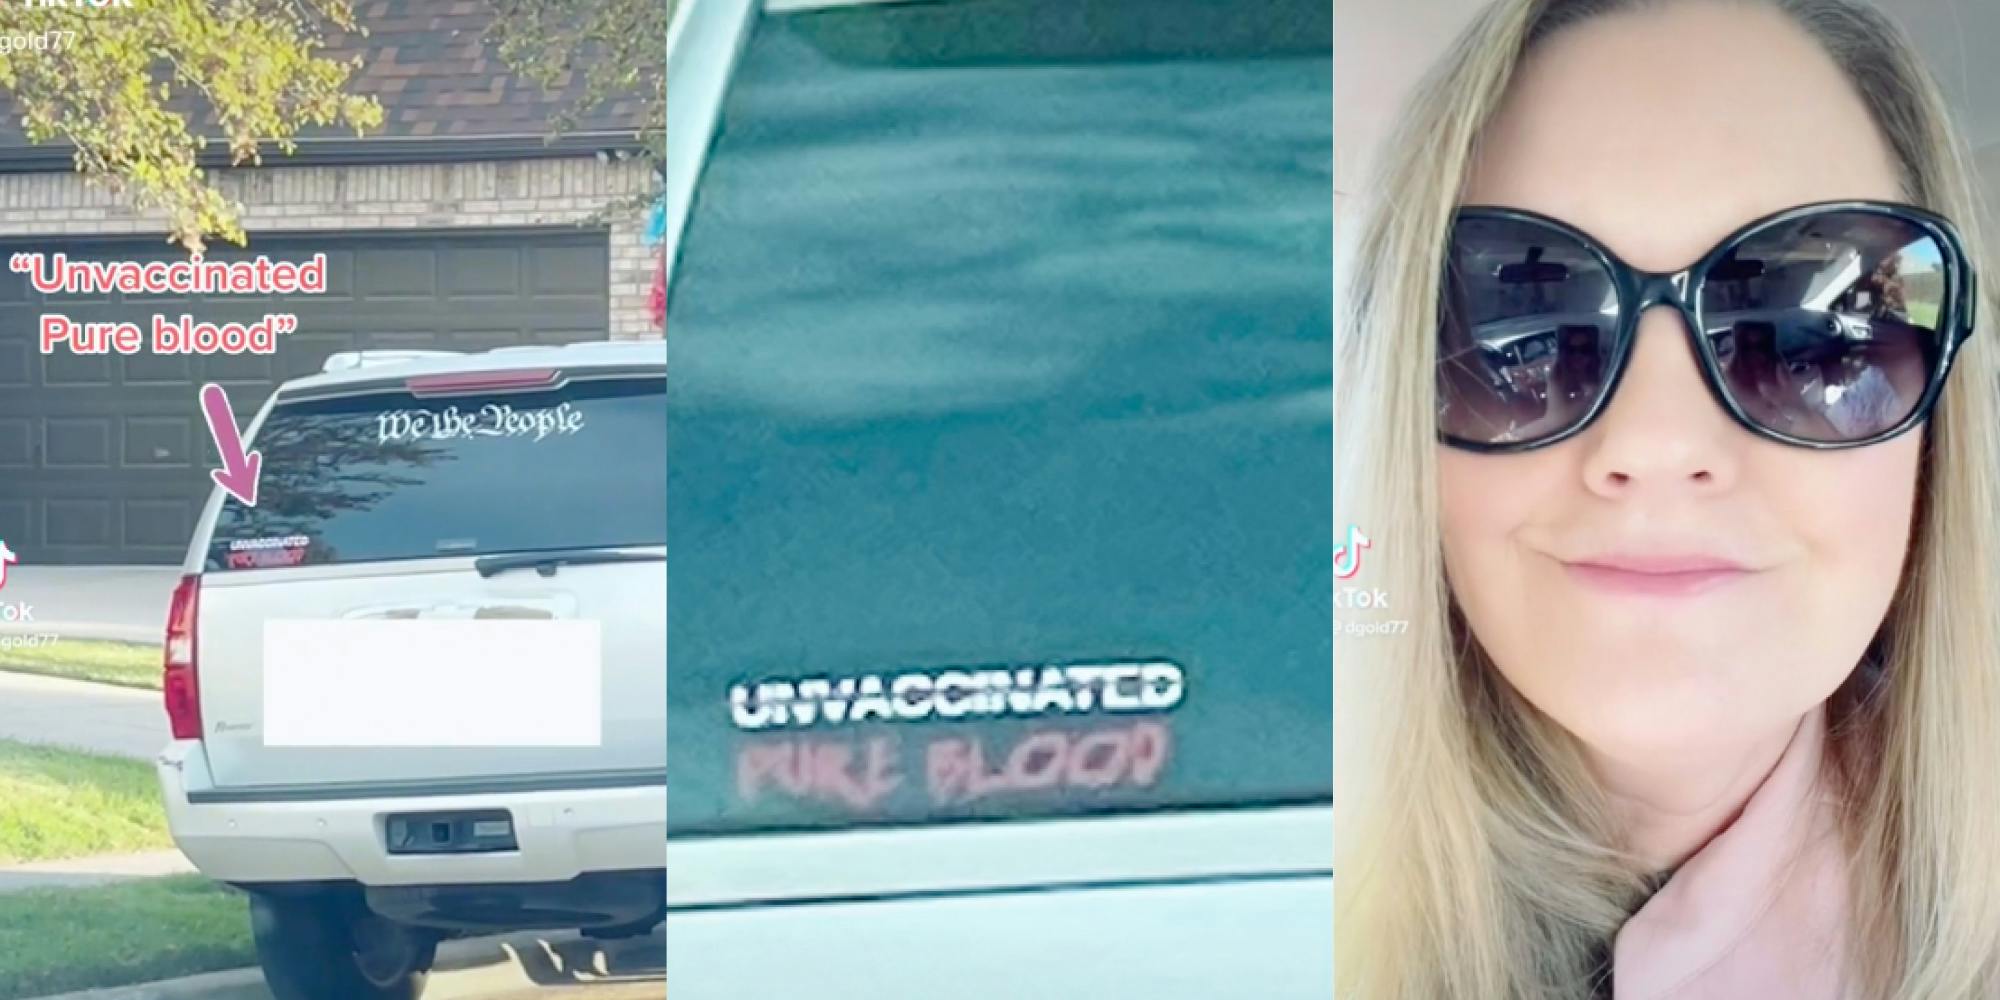 Woman records a car with a bumper sticker advertising that they are unvaccinated in a viral TikTok